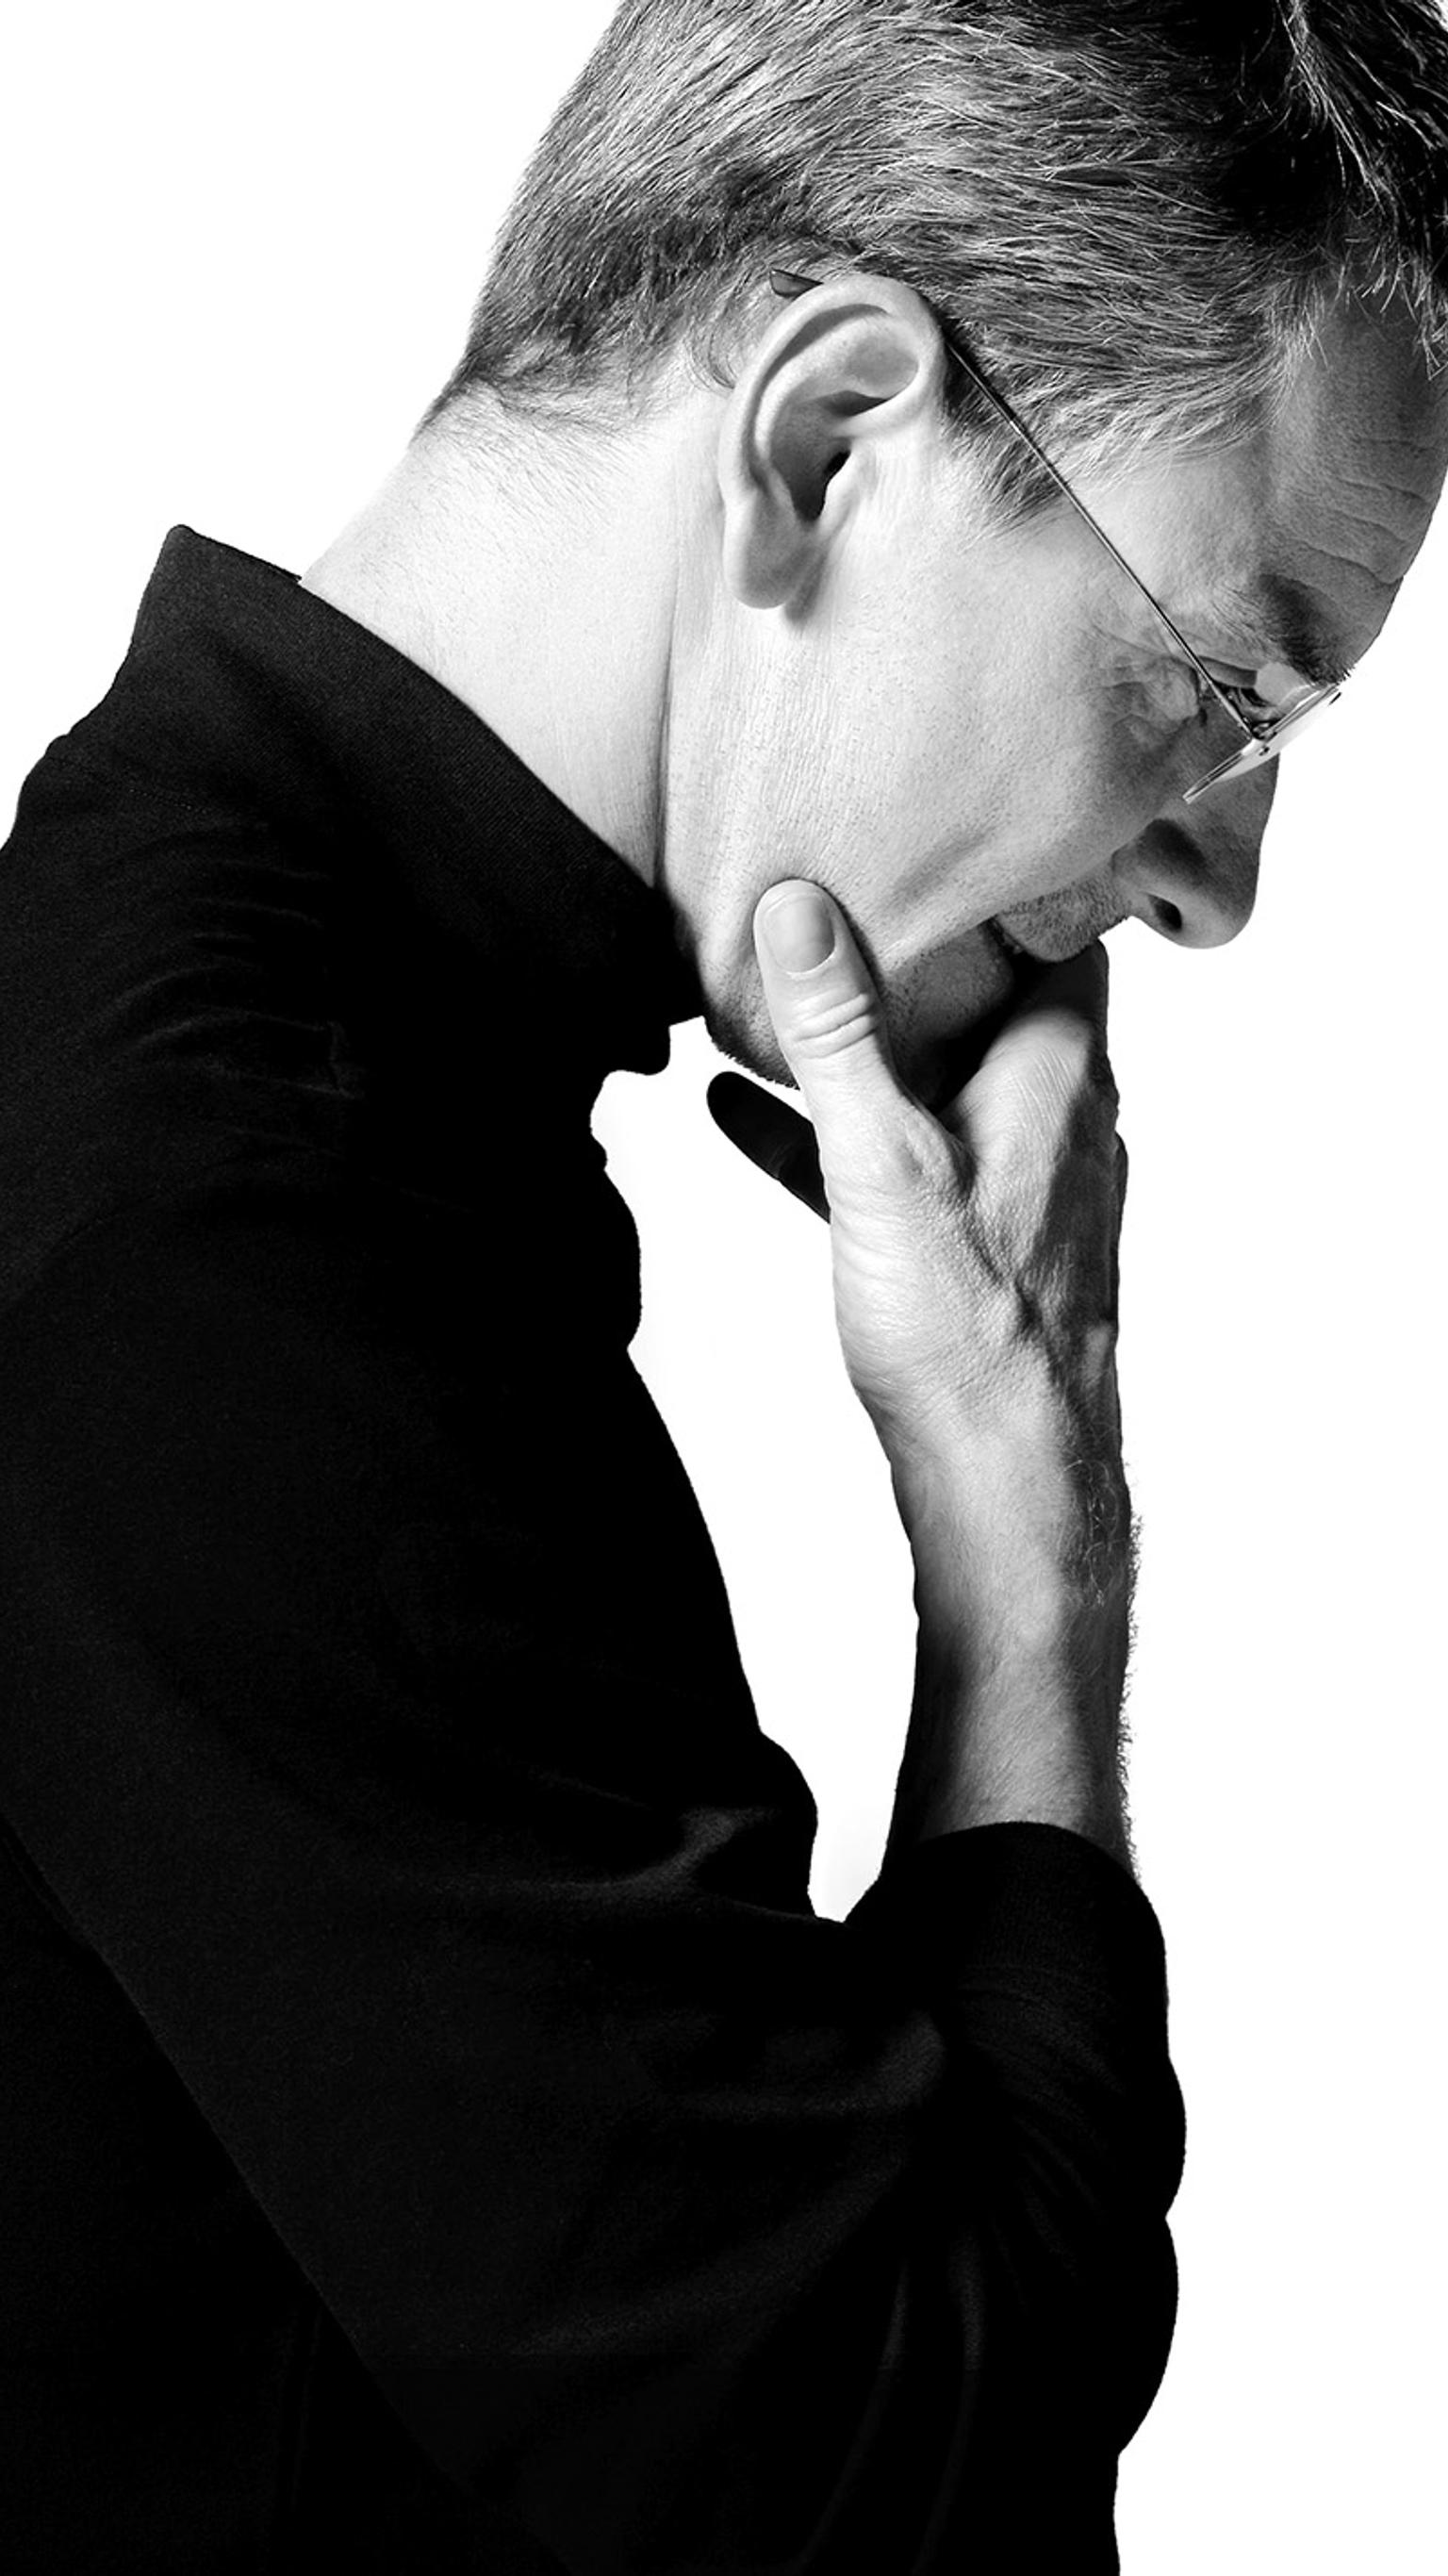 Steve Jobs tribute wallpapers for iPhone 6 and iPhone 6 Plus